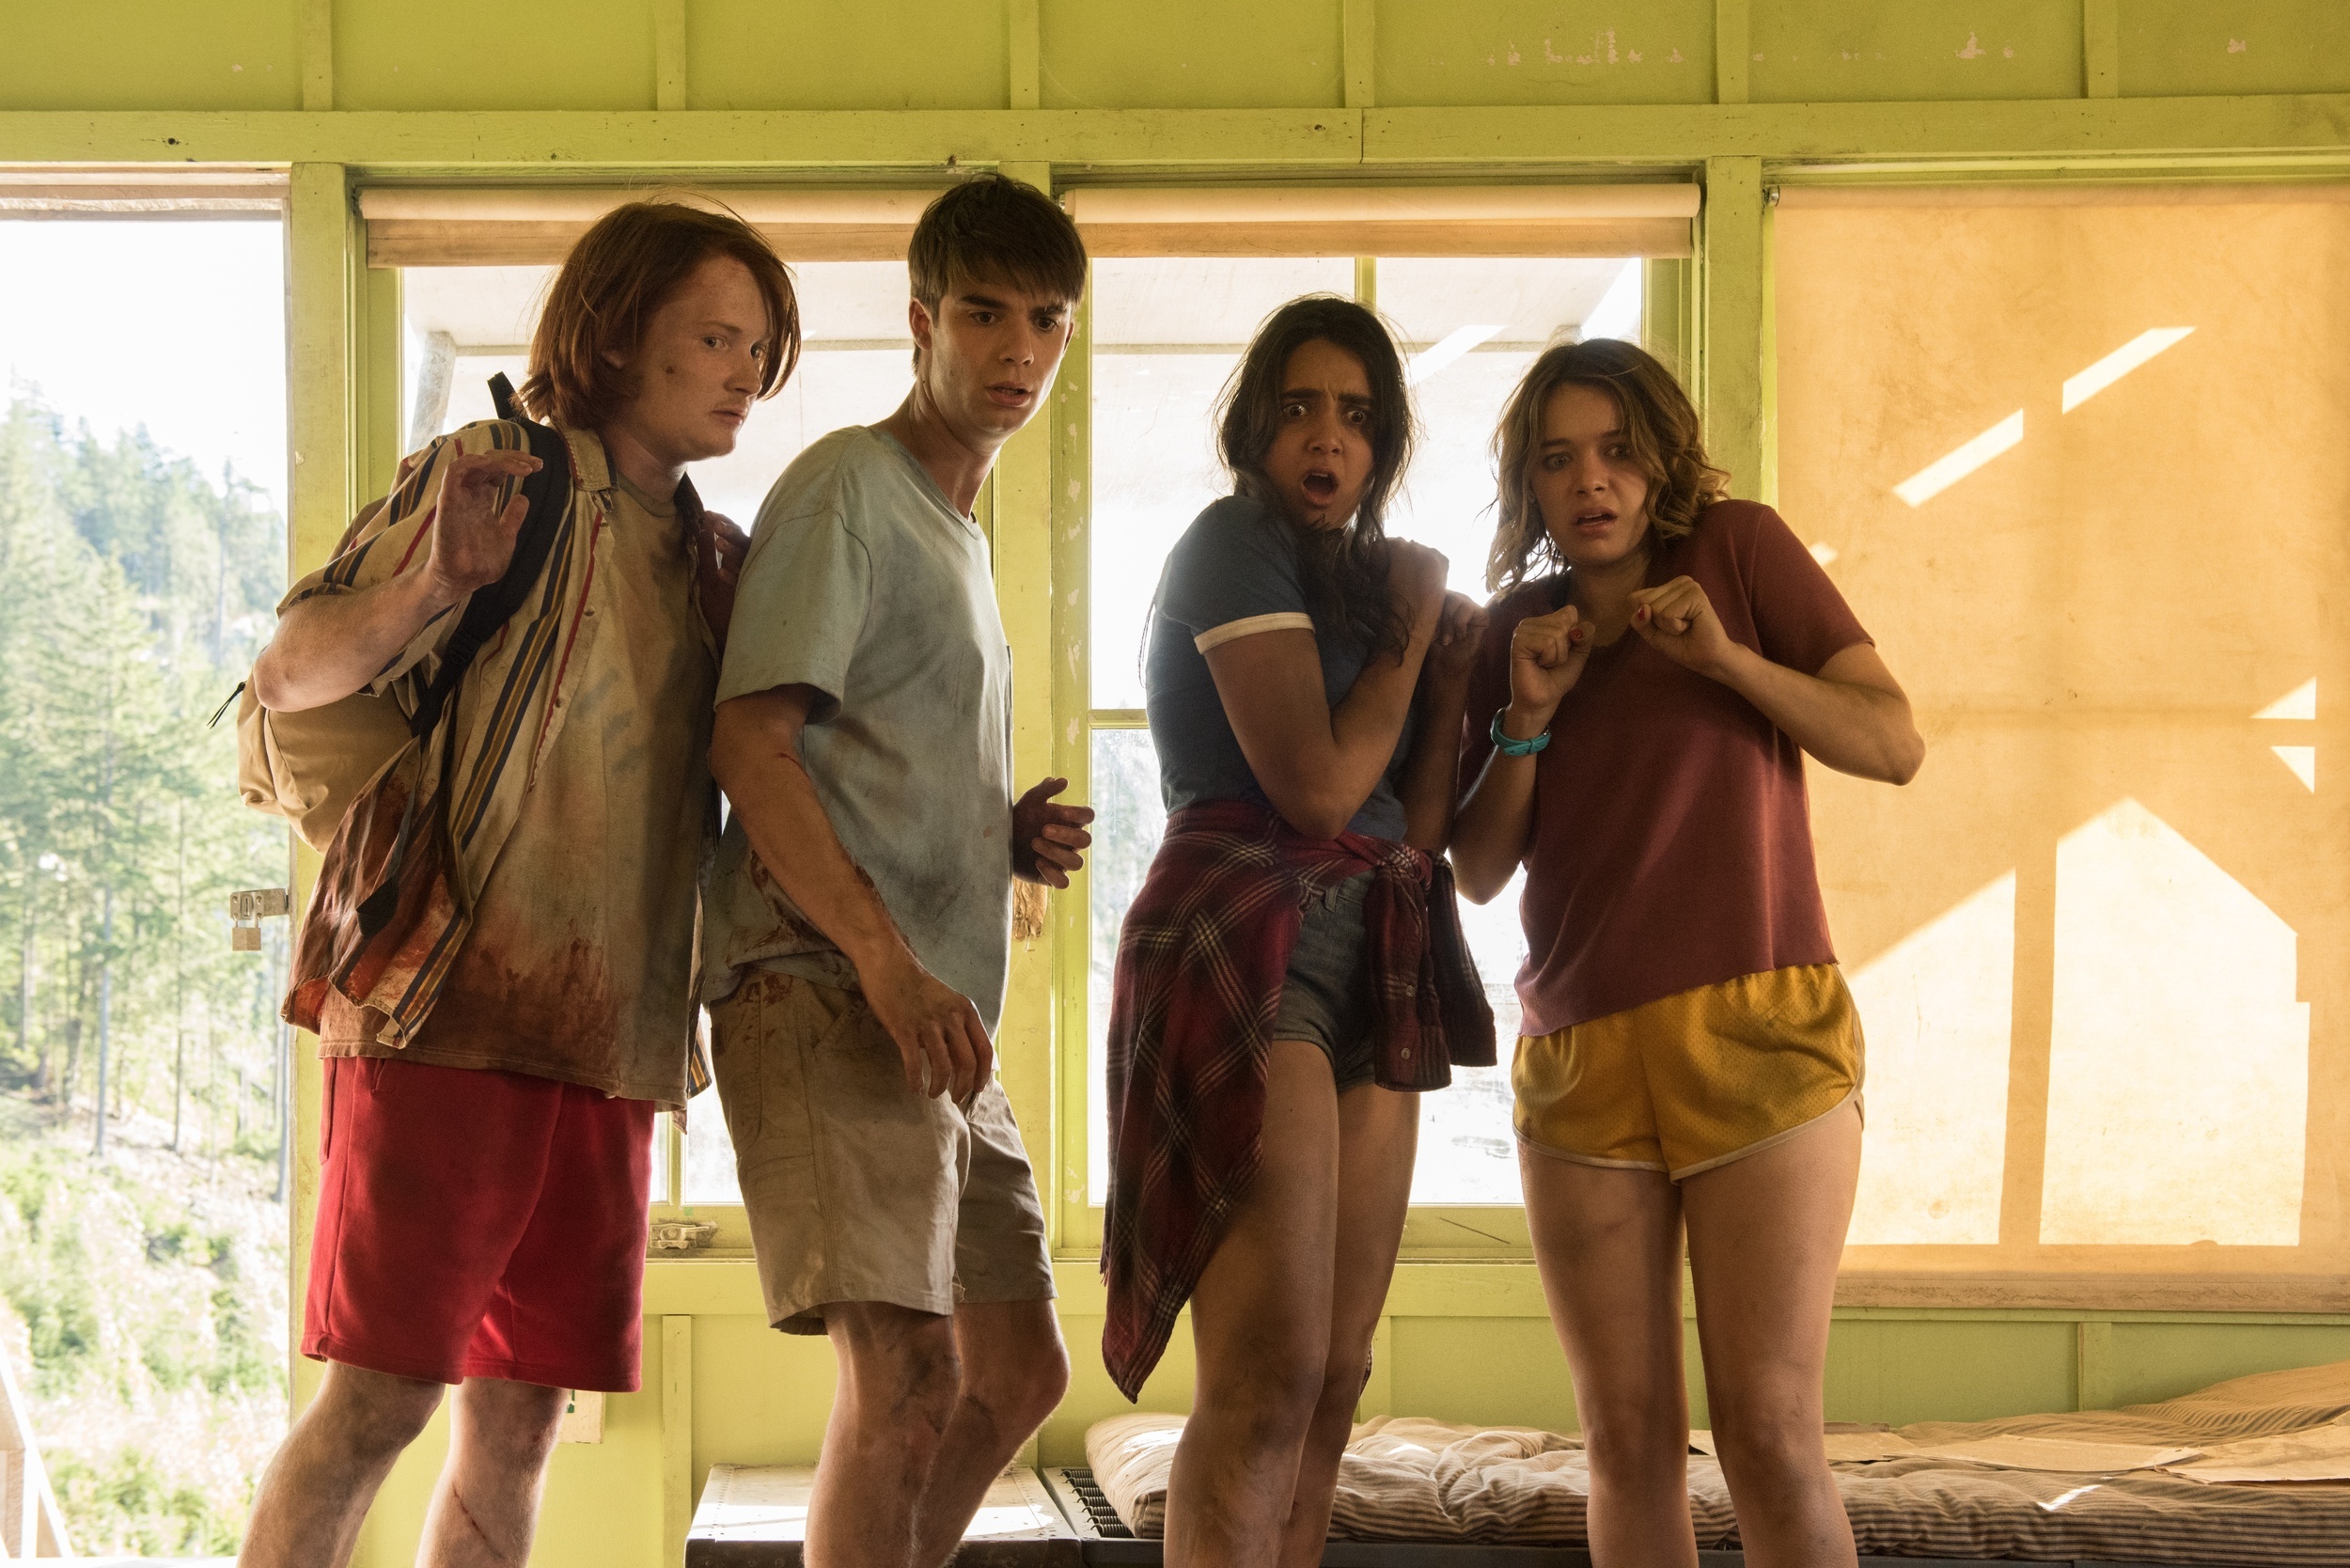 <p>I would say that this movie is probably a stretch for most people, but going in with zero expectations, <em>The Package</em> was low-key hilarious. As a fan of Eduardo Franco (<em>Stranger Things, Booksmart</em>) and Geraldine Viswanathan (<em>Miracle Workers, Blockers</em>), I figured it was worth a watch, and I was right! Though the critics' consensus on <a href="https://www.rottentomatoes.com/m/the_package_2018" rel="noopener noreferrer">Rotten Tomatoes</a> states that "a pėnis joke does not a movie make," I have to politely disagree. </p><p>You may also like: <a href='https://www.yardbarker.com/entertainment/articles/horror_ble_21_terrible_scary_movies_we_still_love_to_watch_031424/s1__38499797'>Horror-ble: 21 terrible scary movies we still love to watch</a></p>